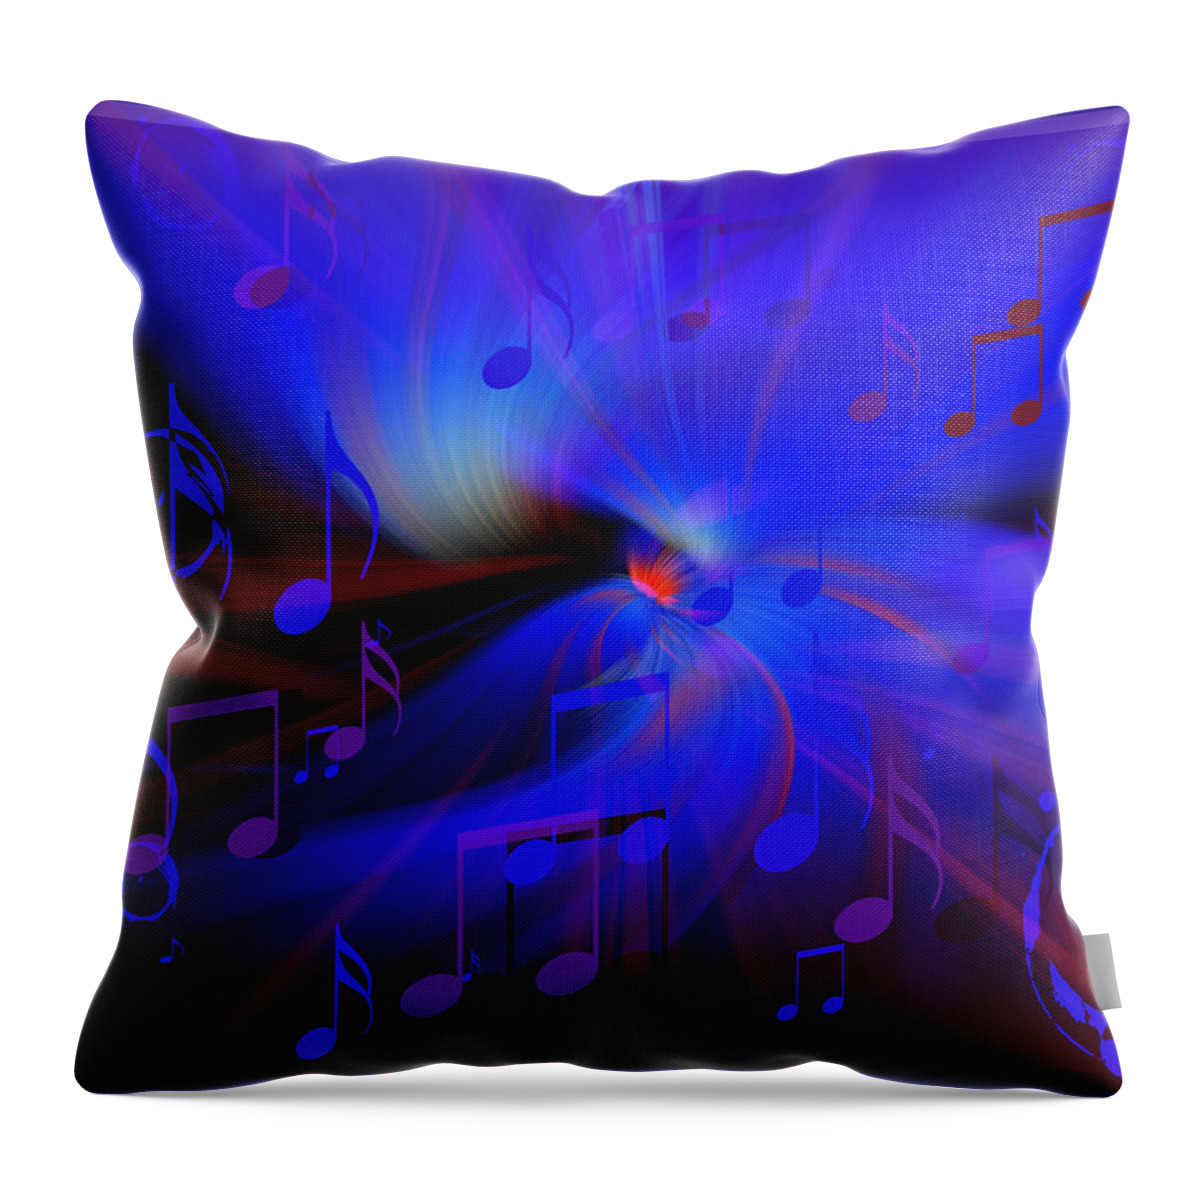 Design Throw Pillow featuring the painting B.B's Blues by Mark Myhaver